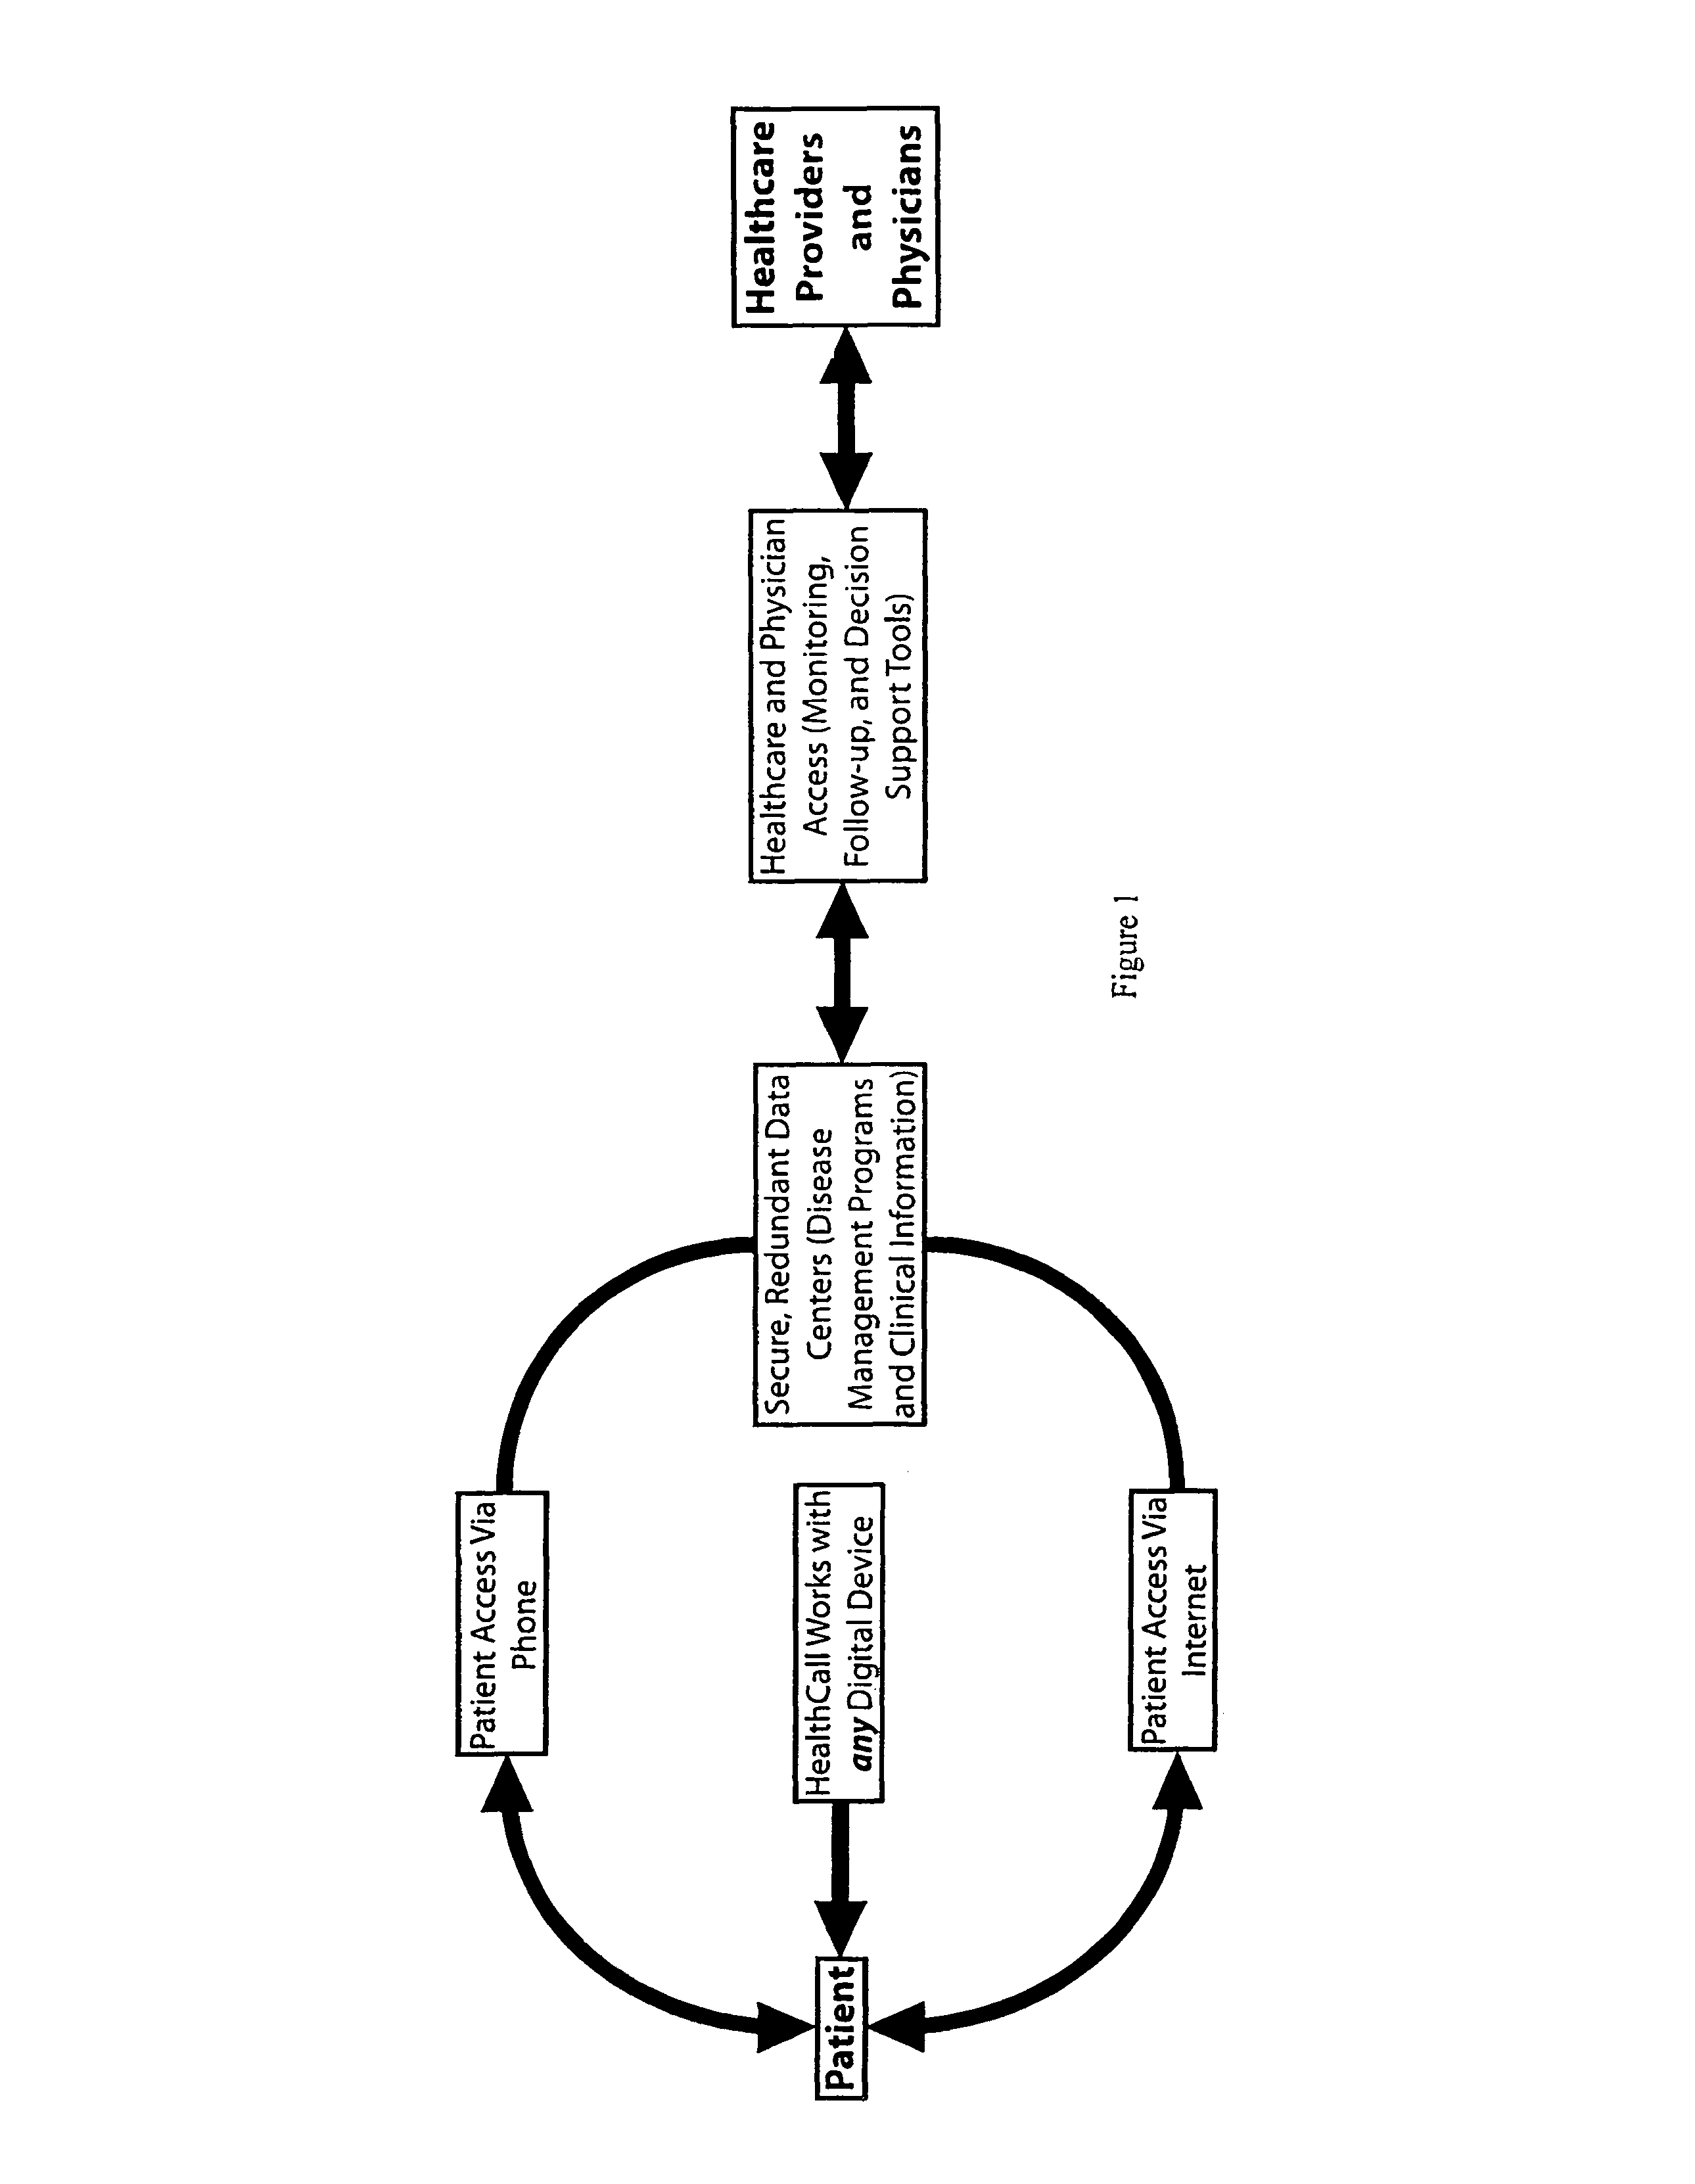 Information management and communications system for communication between patients and healthcare providers